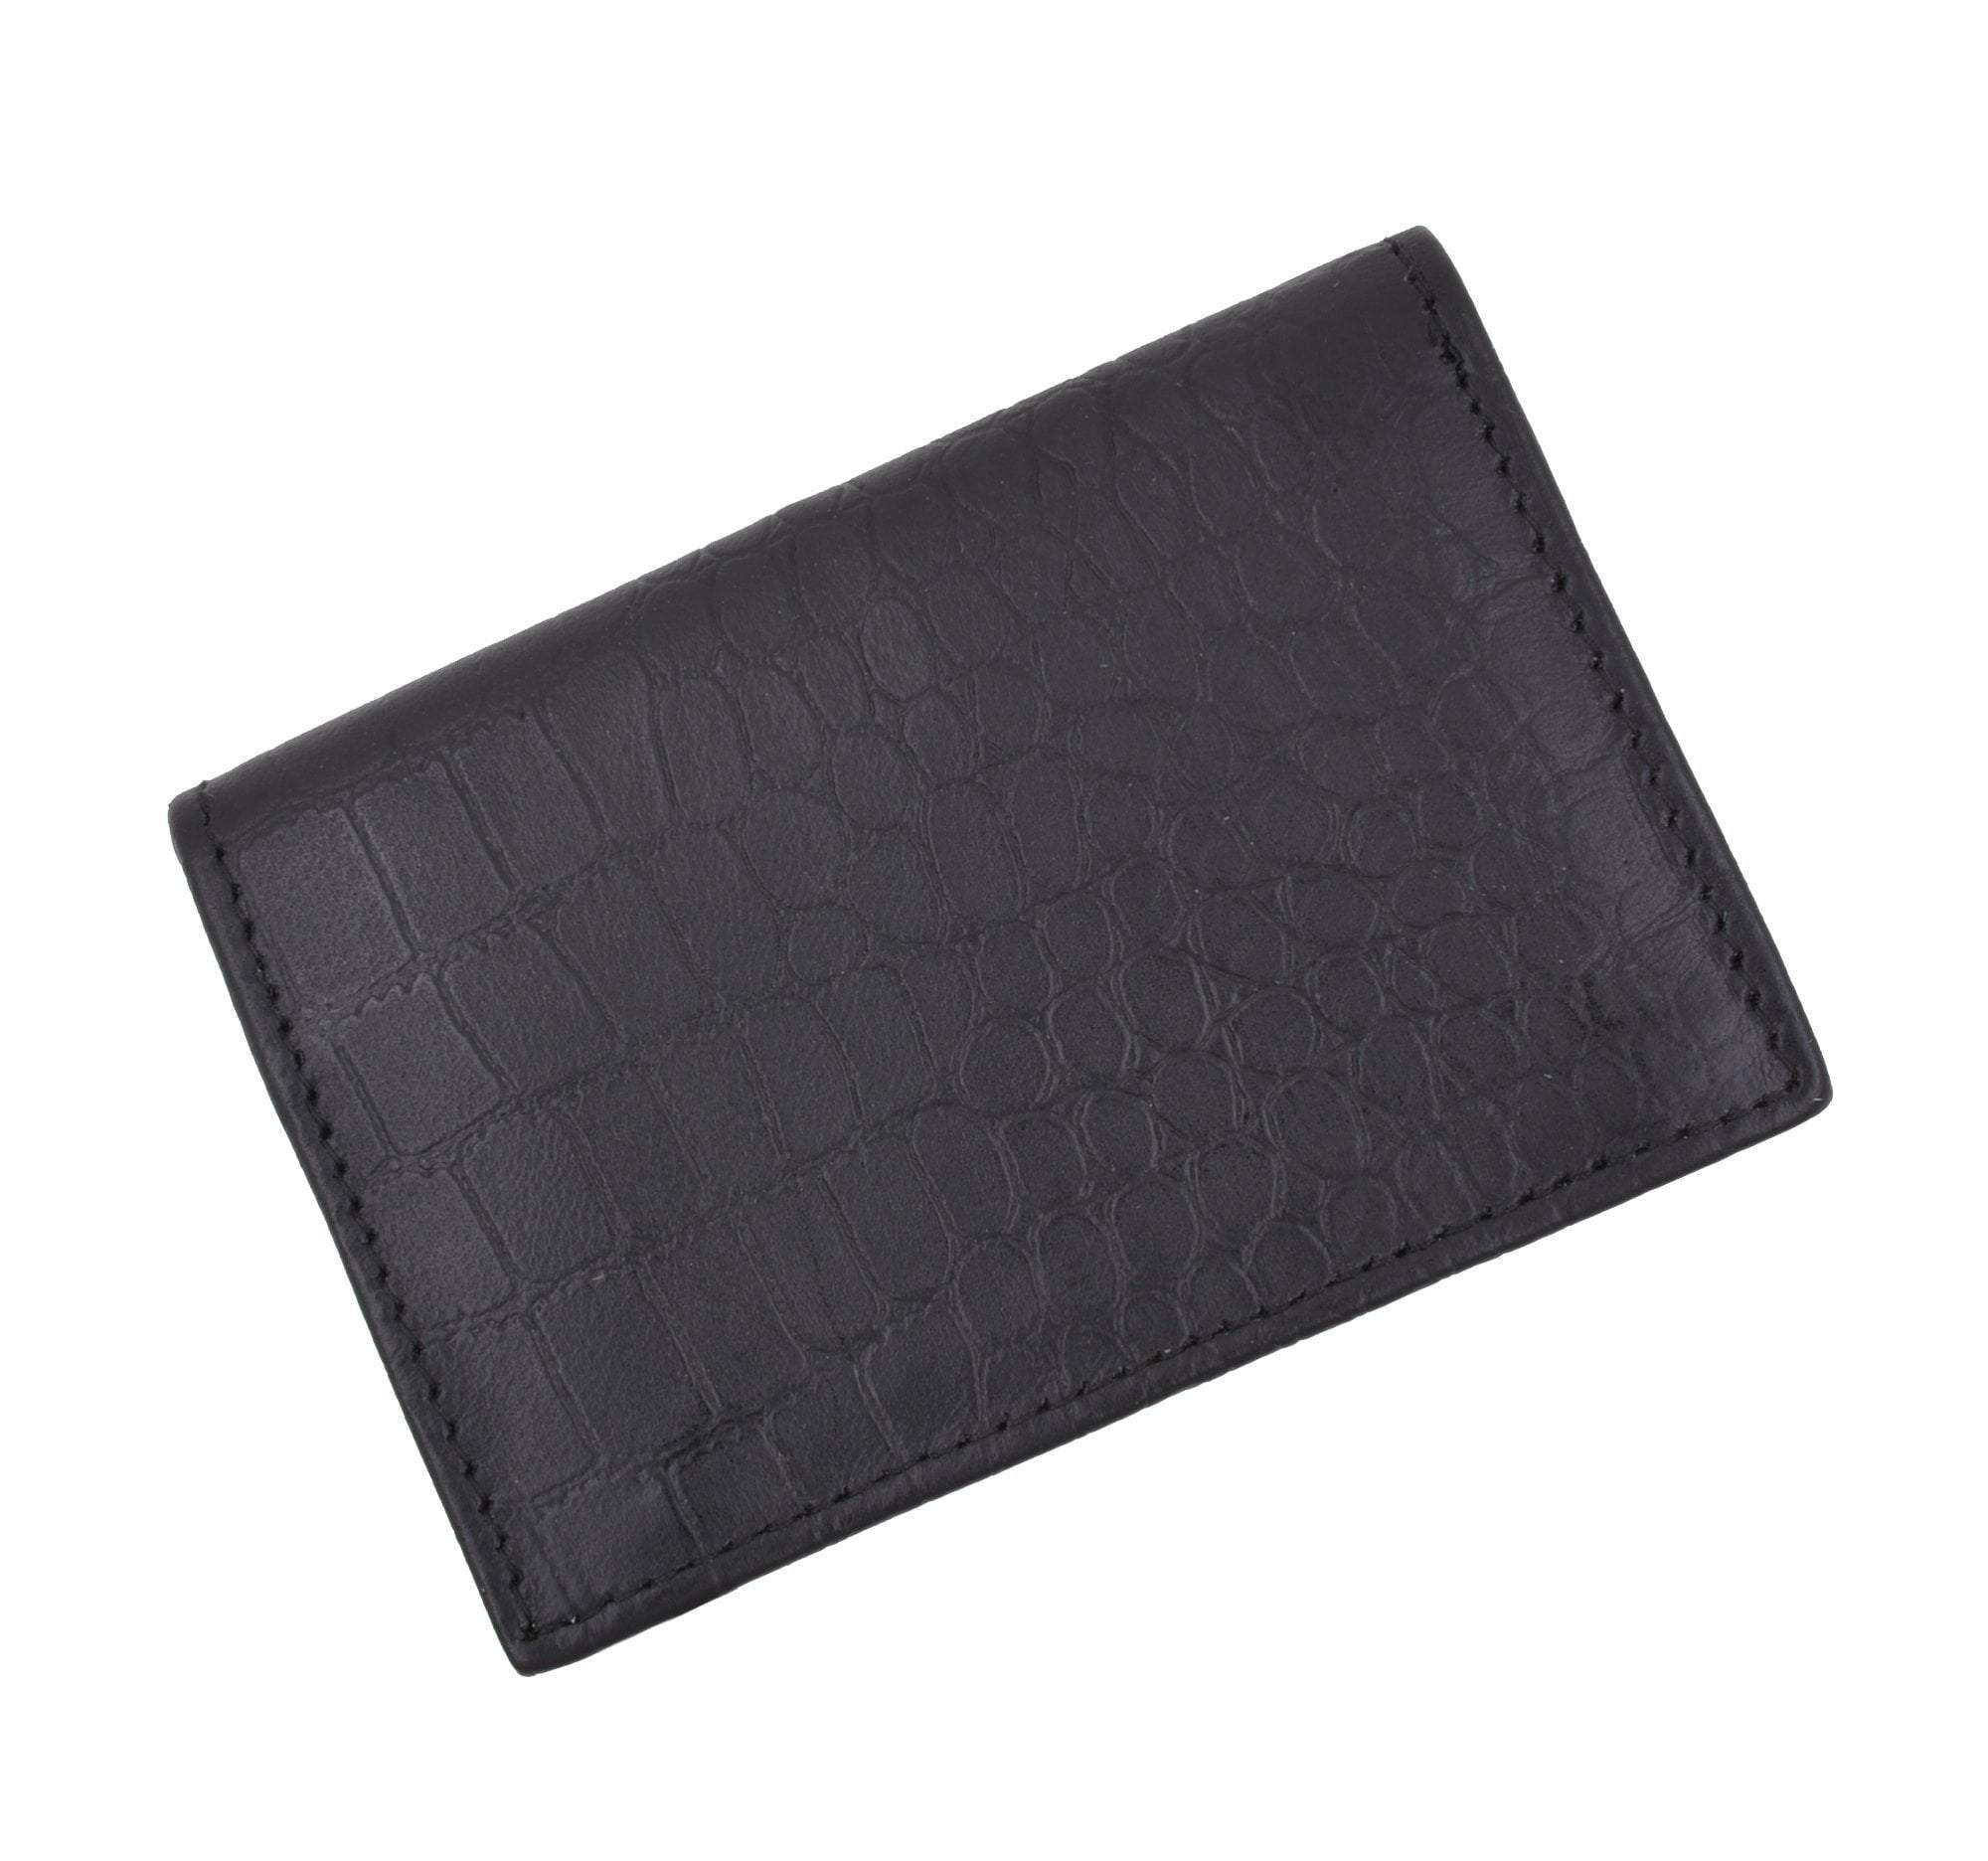 Pocket Organizer Crocodile Mat - Wallets and Small Leather Goods